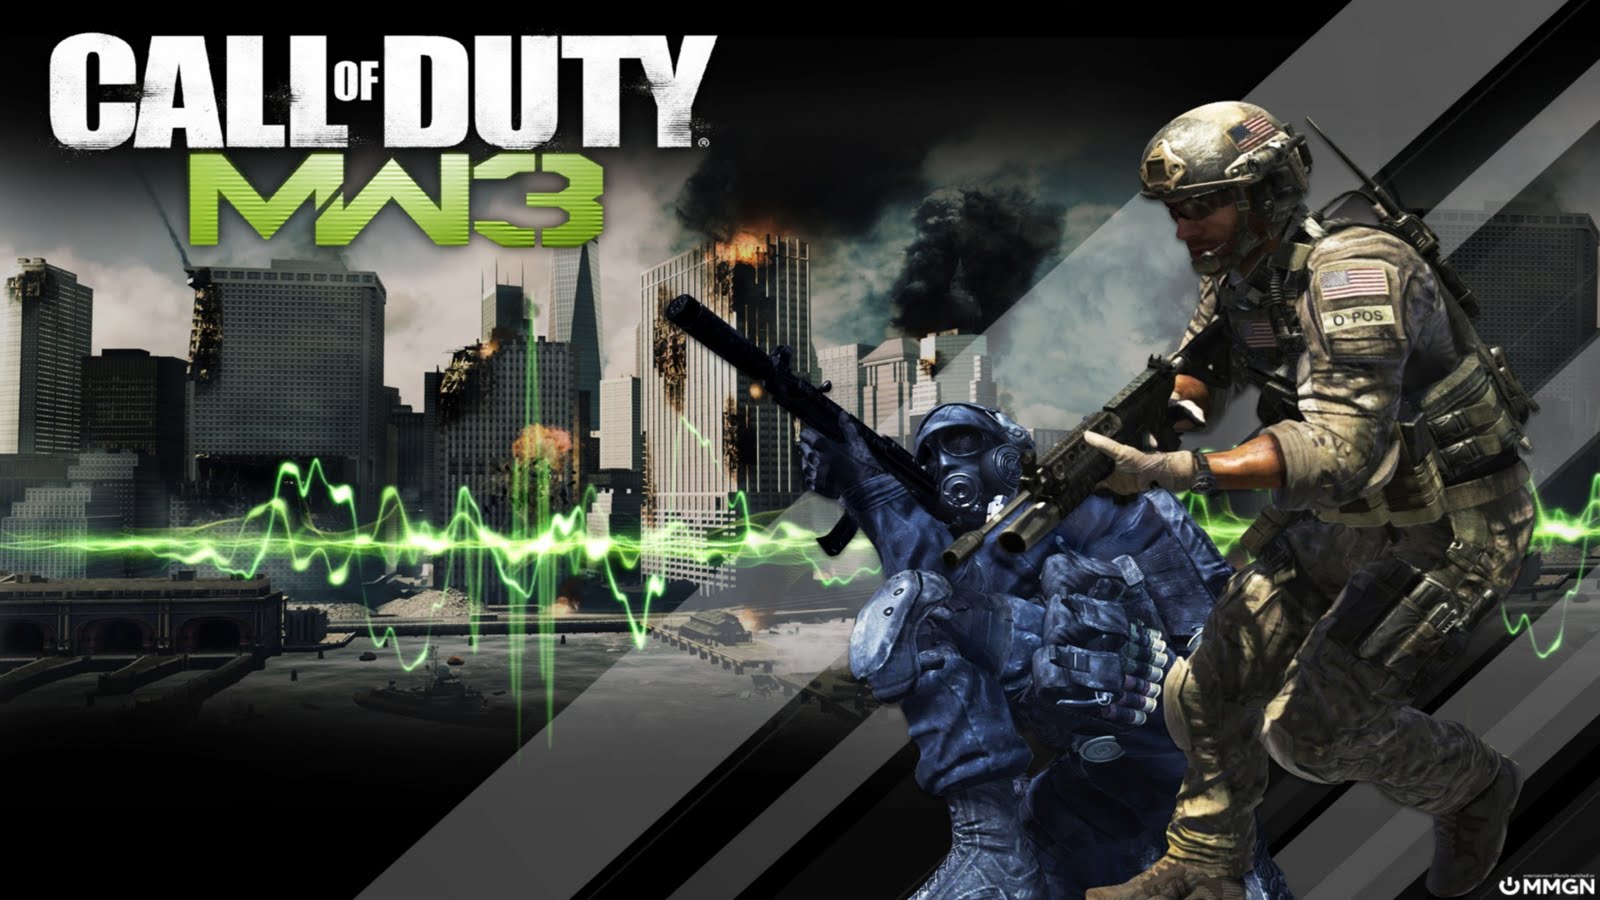 call of duty wallpaper hd,action adventure game,shooter game,pc game,games,strategy video game